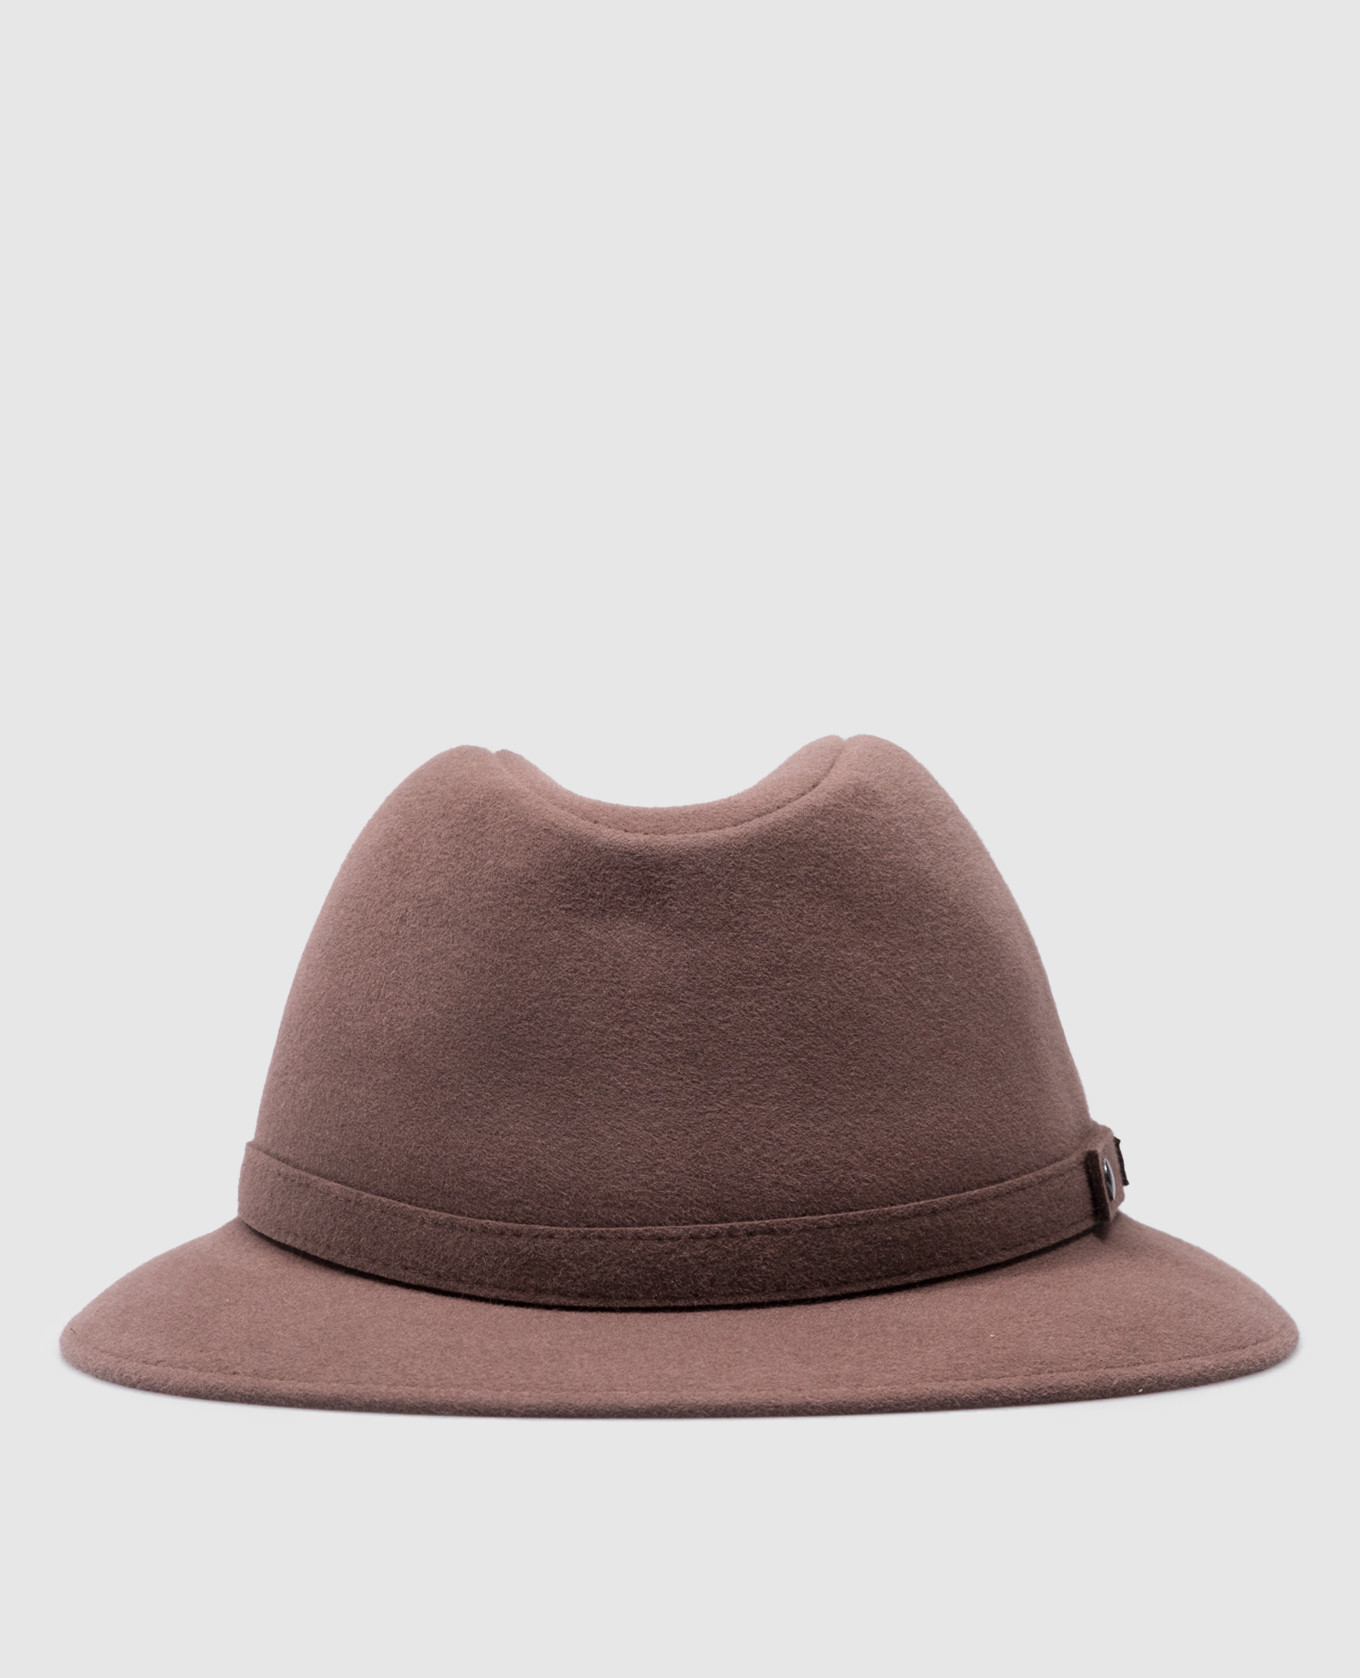 Alessandria brown wool hat with strap